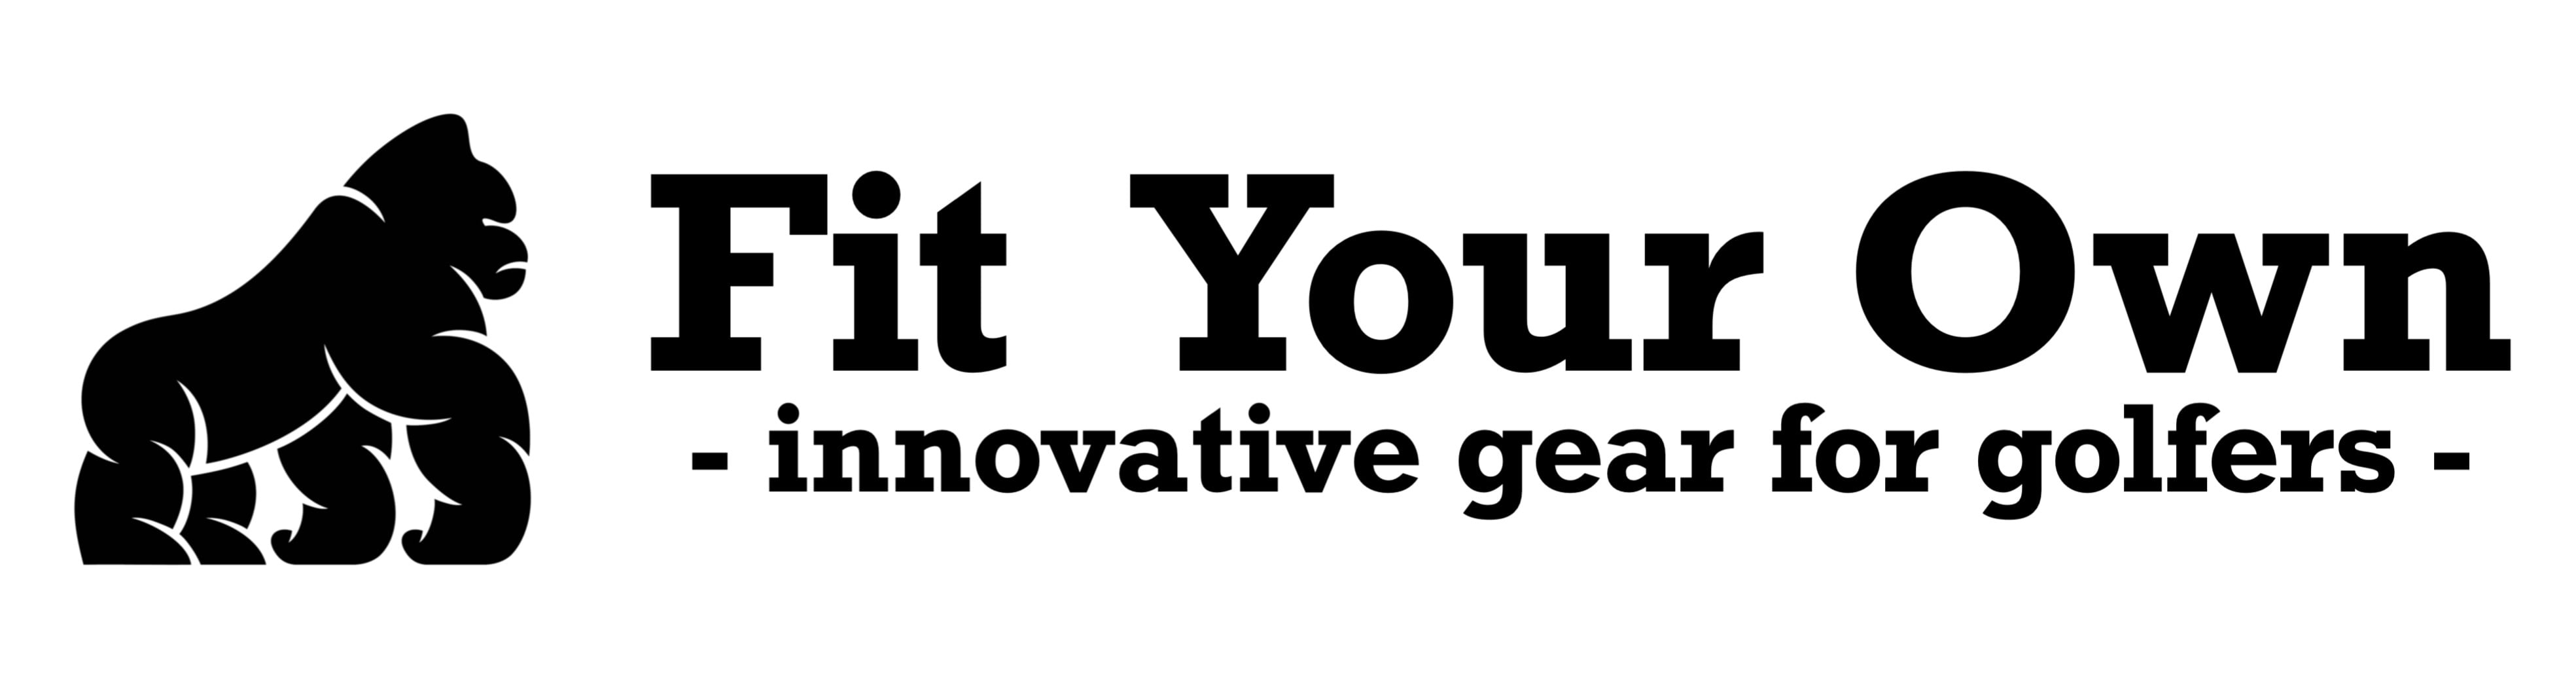 Fit Your Own -innovative gear for golfers-